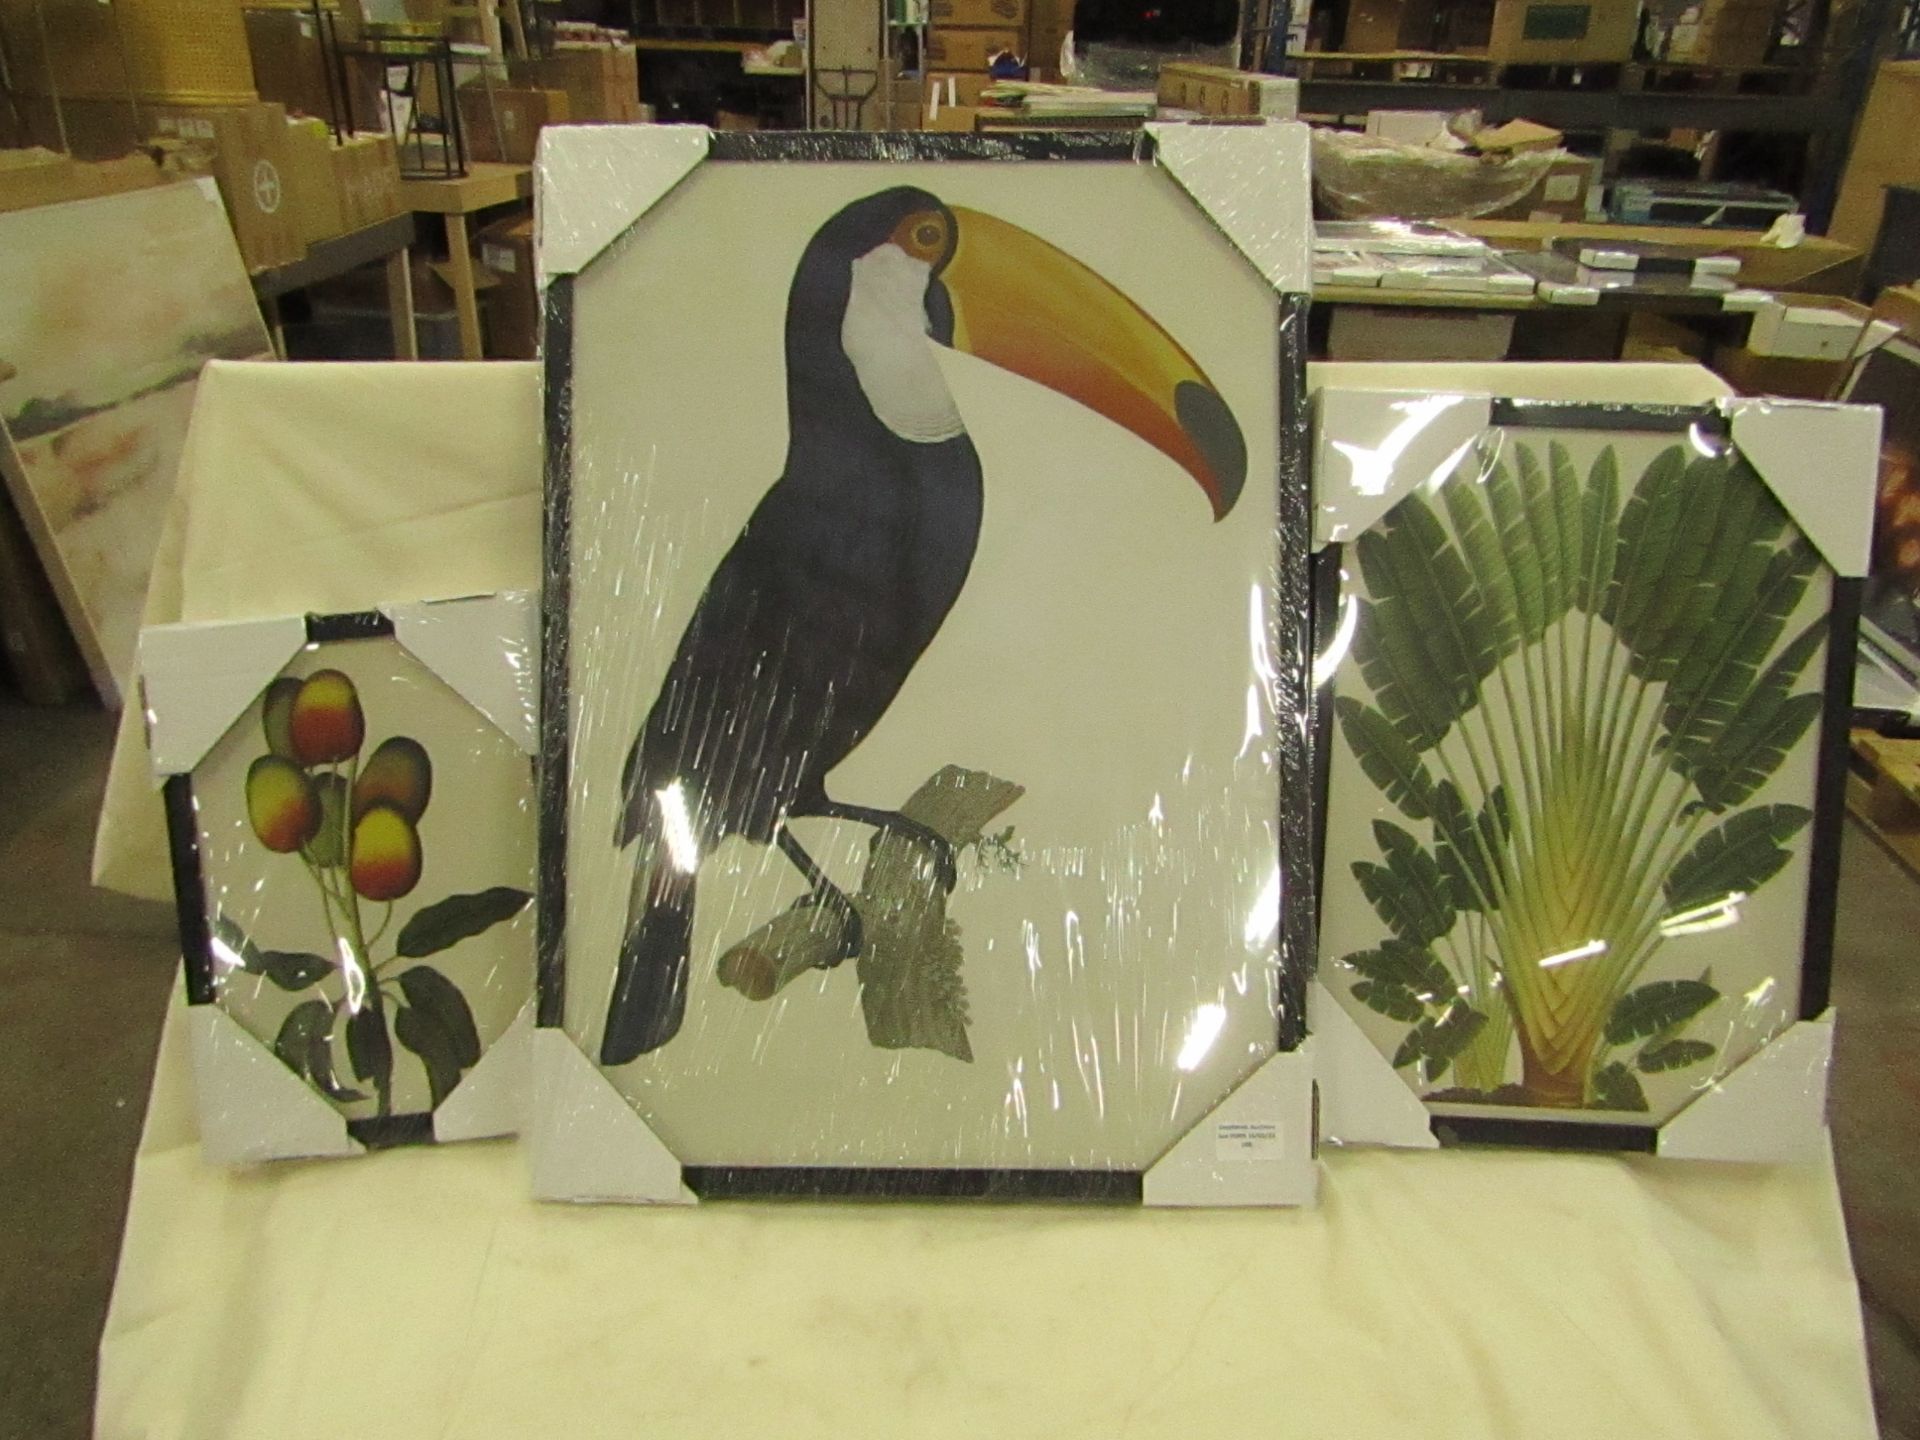 1 x Made.com Vintage Gallery Wall Toco Toucan from the Natural History Museum Set of 3 Framed Wall